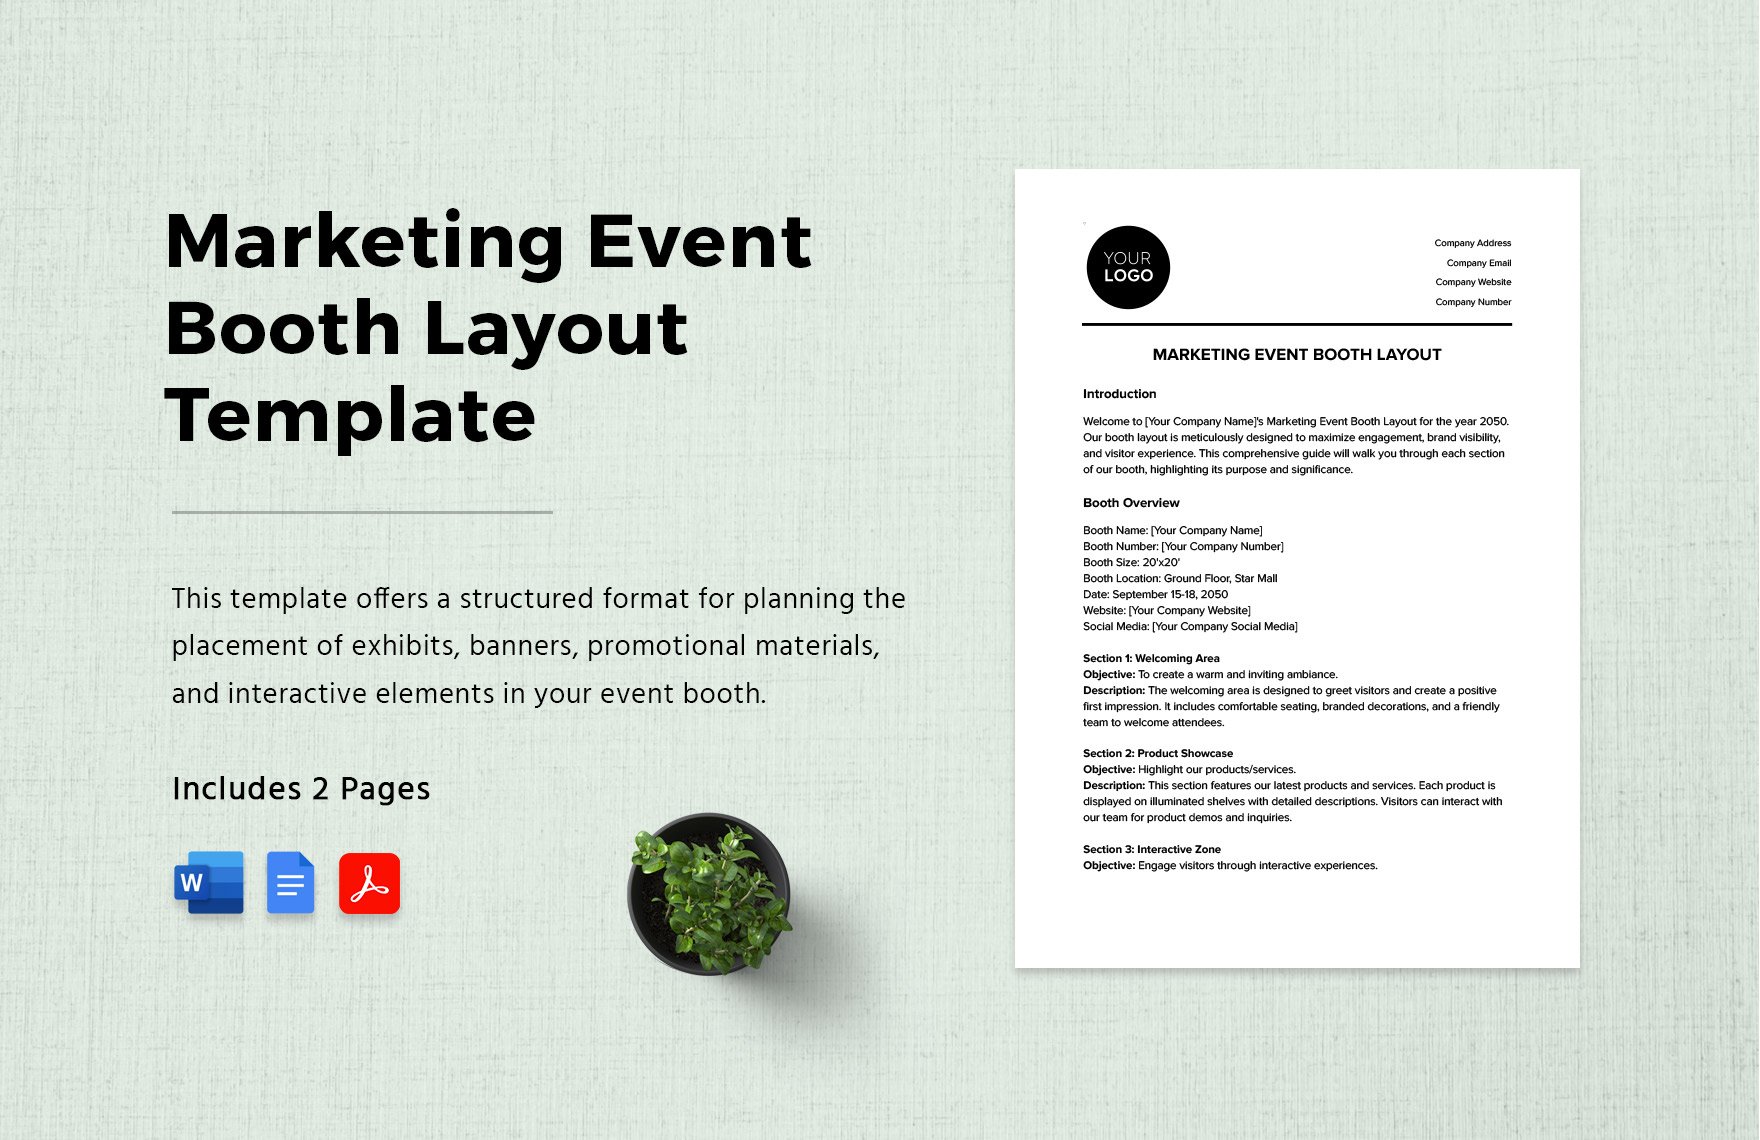 Marketing Event Booth Layout Template in Word, Google Docs, PDF